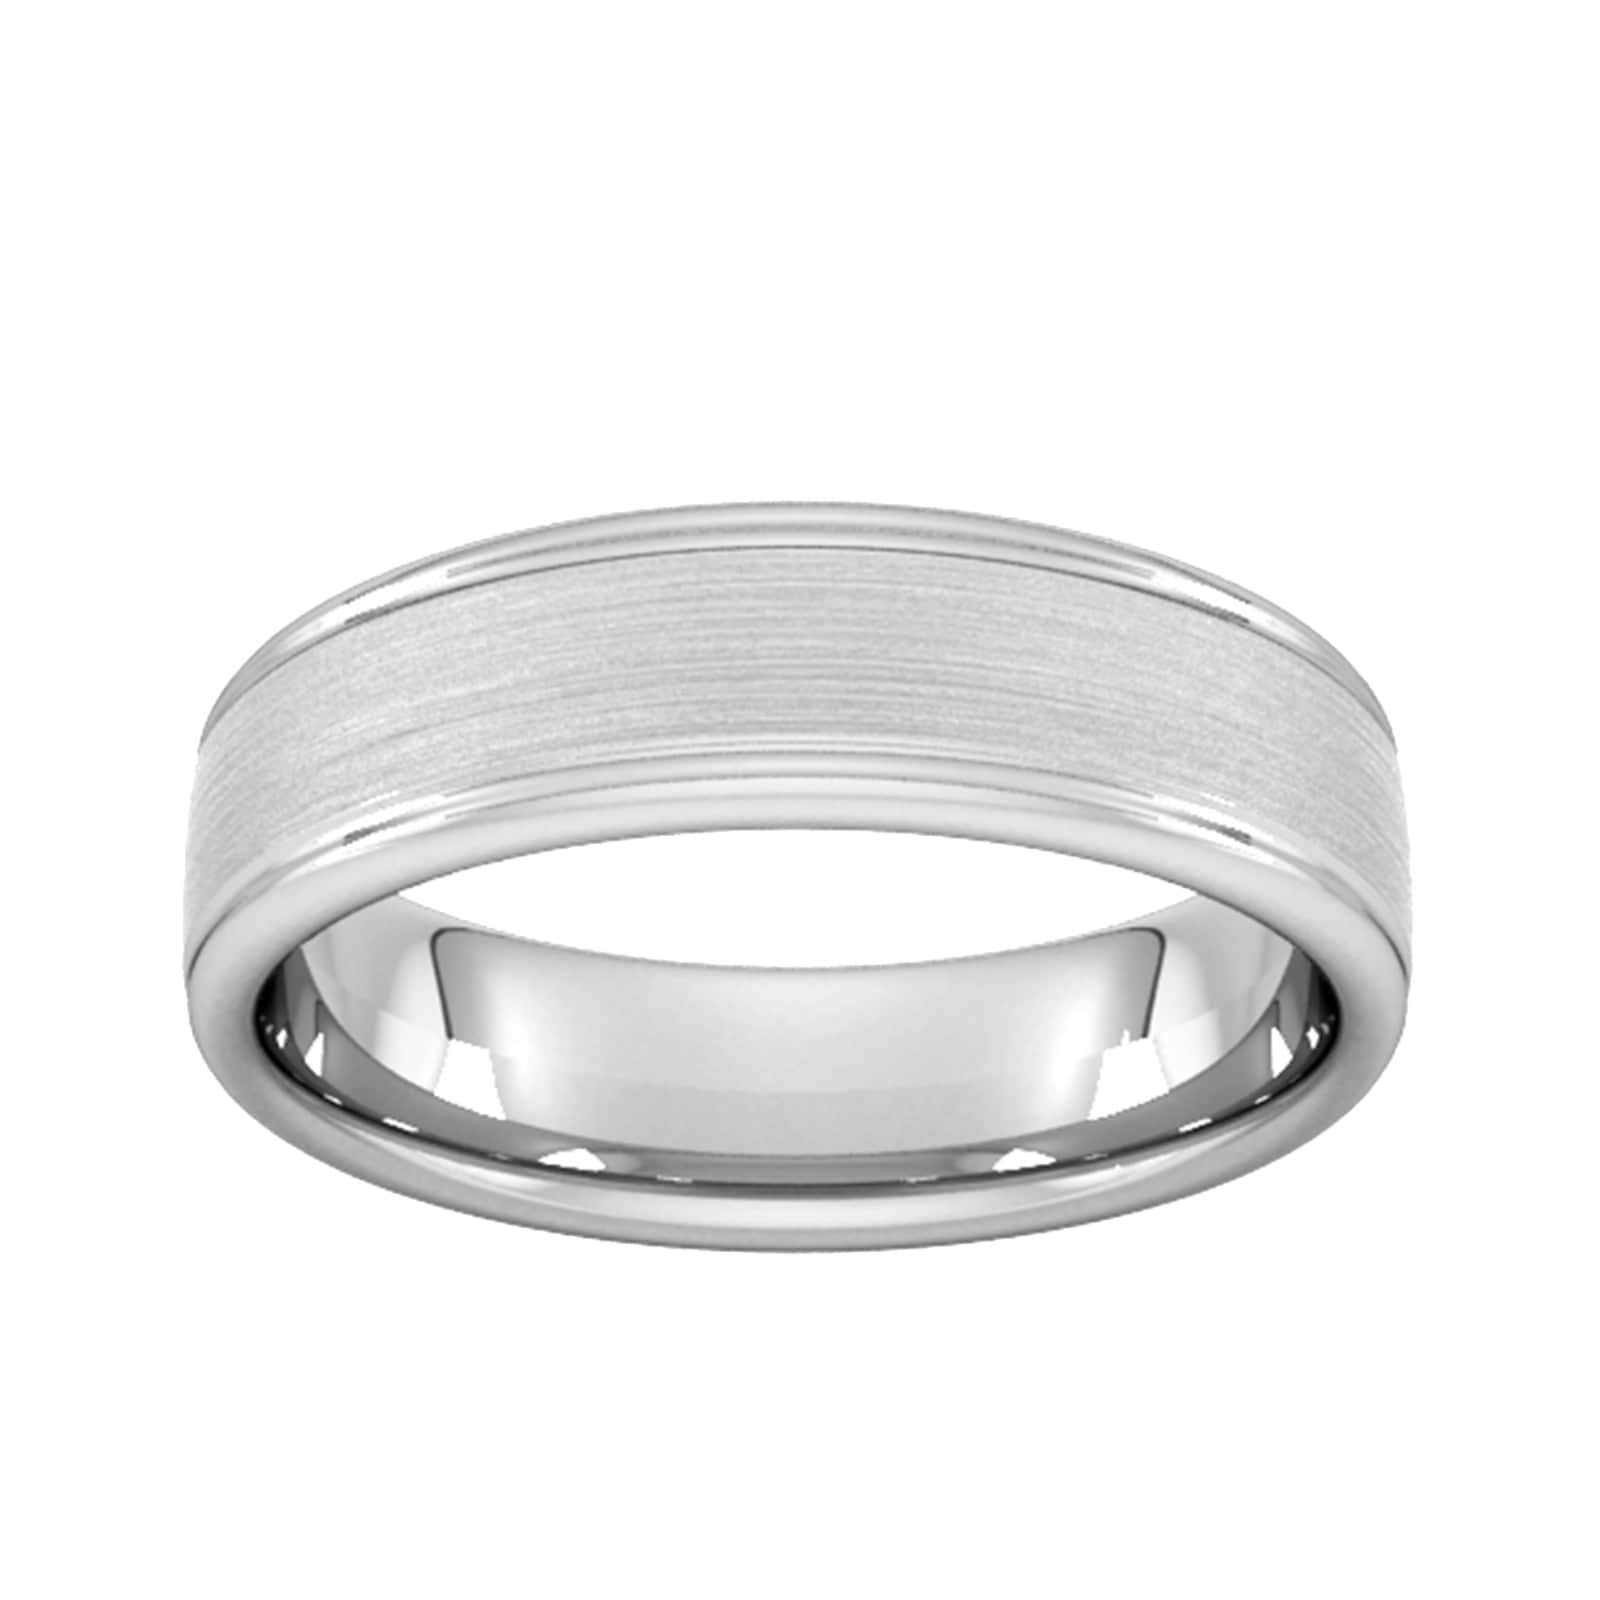 6mm D Shape Standard Matt Centre With Grooves Wedding Ring In Platinum - Ring Size P